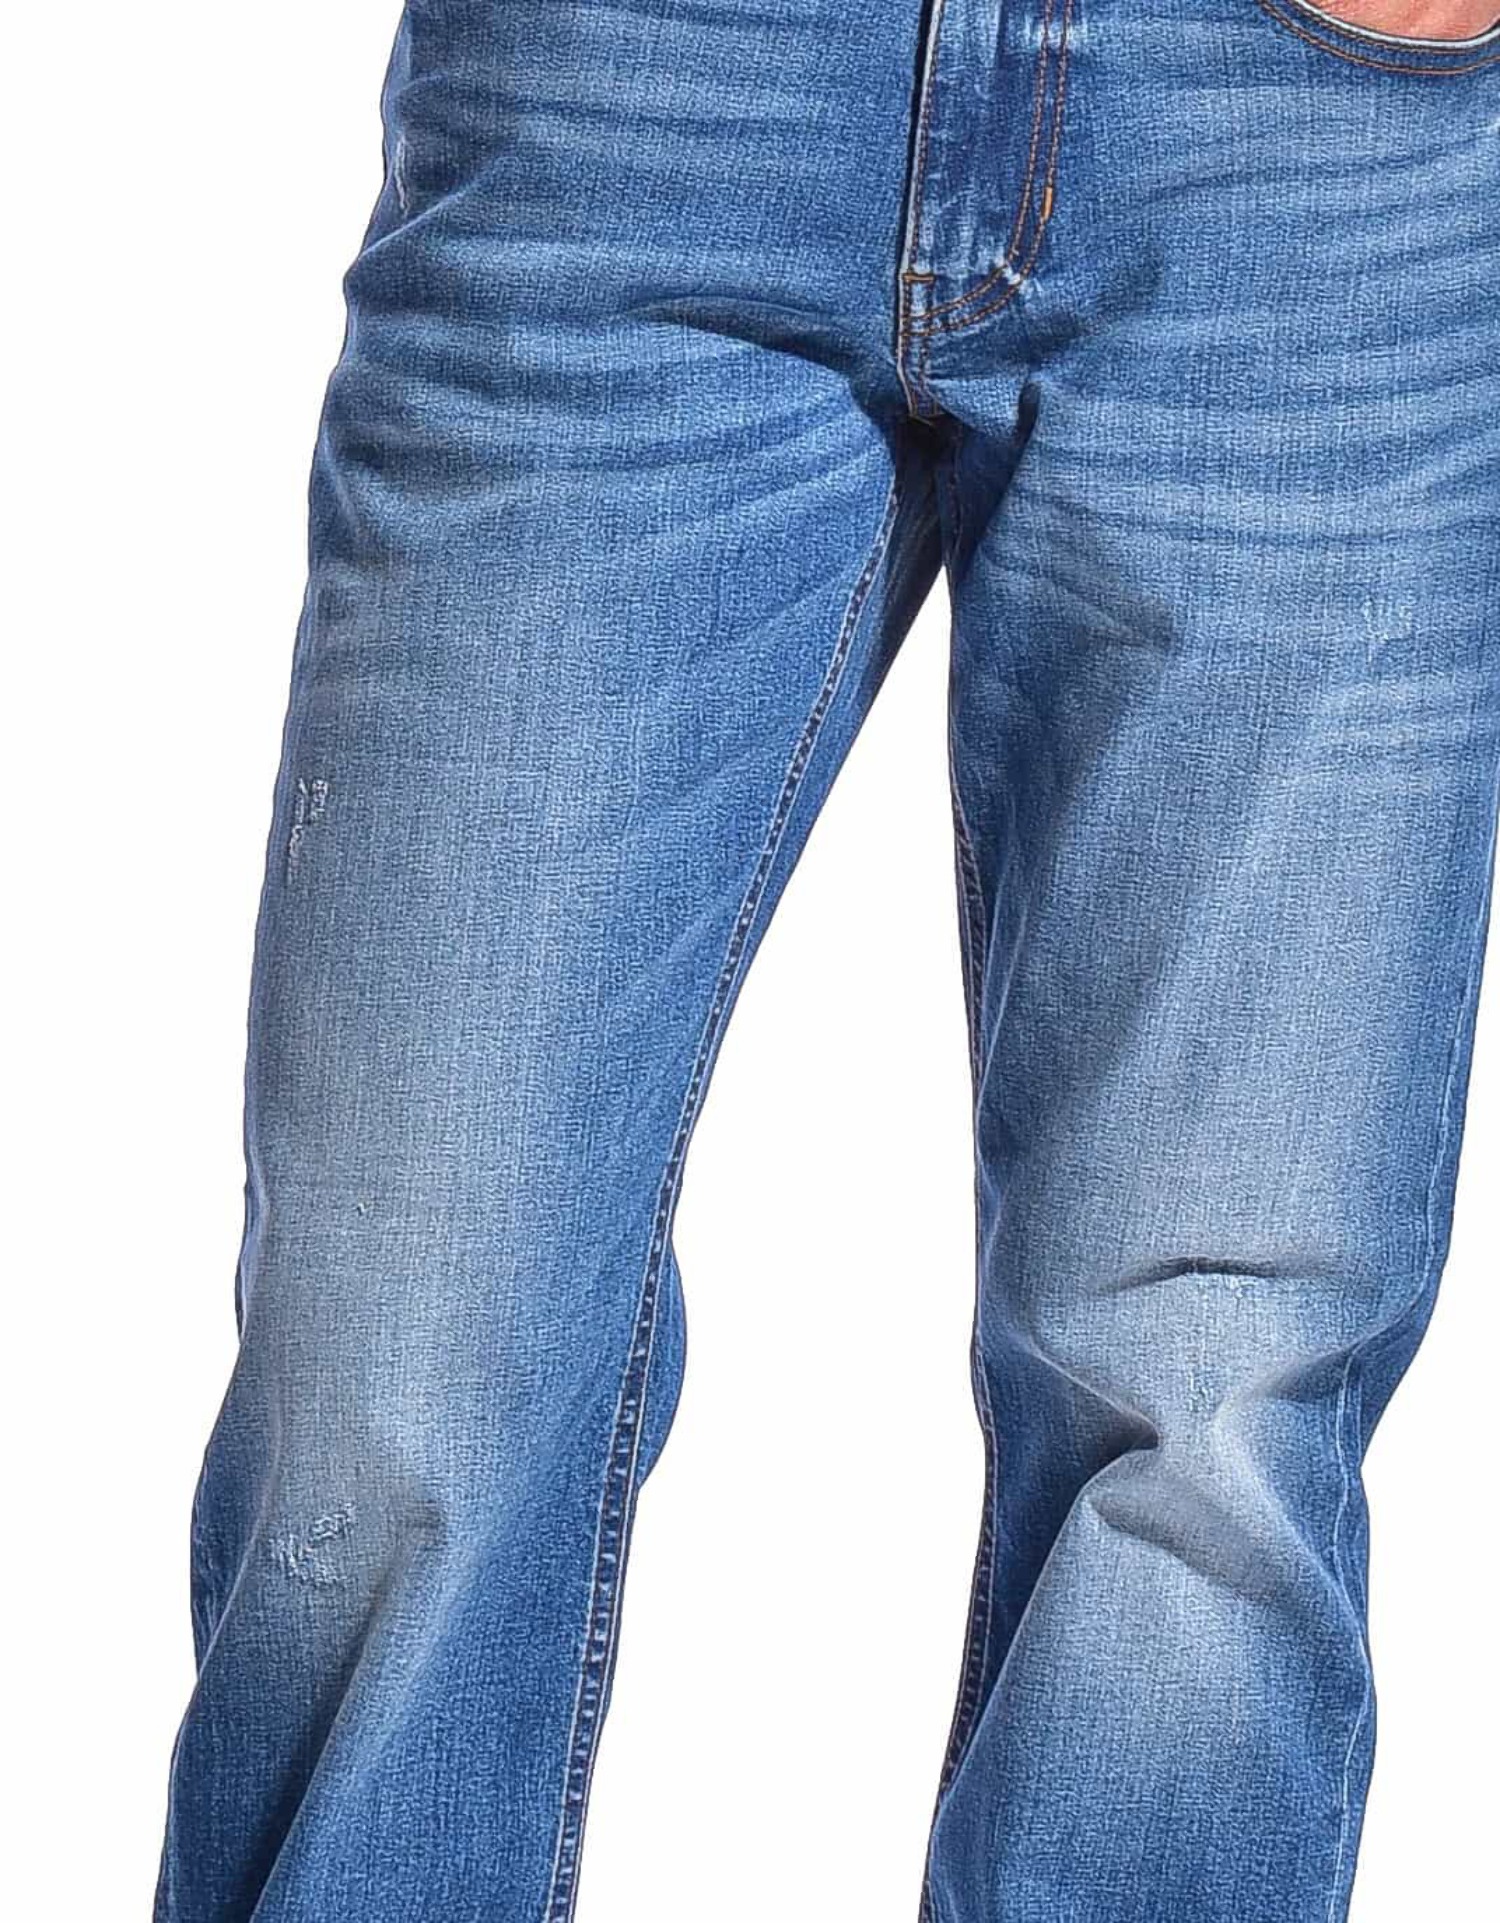 DEPARTED MEN'S PARK AVENUE STRAIGHT JEANS - image 2 of 11